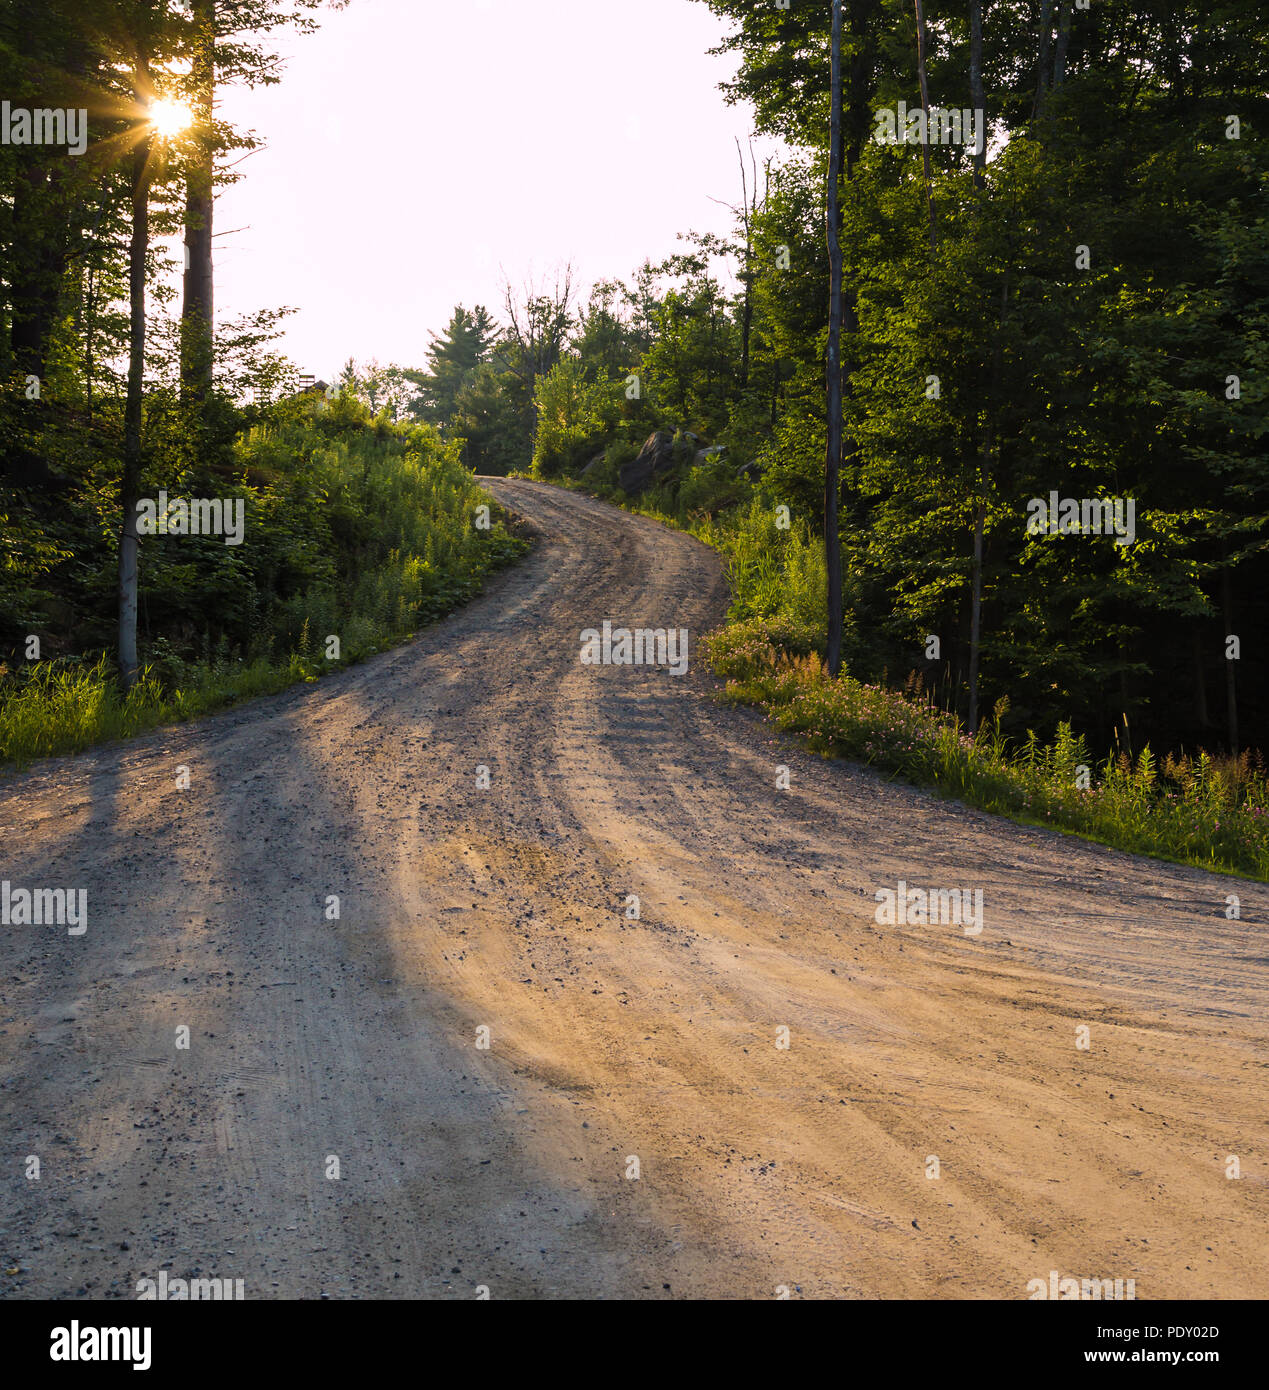 Country dirt road in shadow and sunlight surrounded by trees. Stock Photo